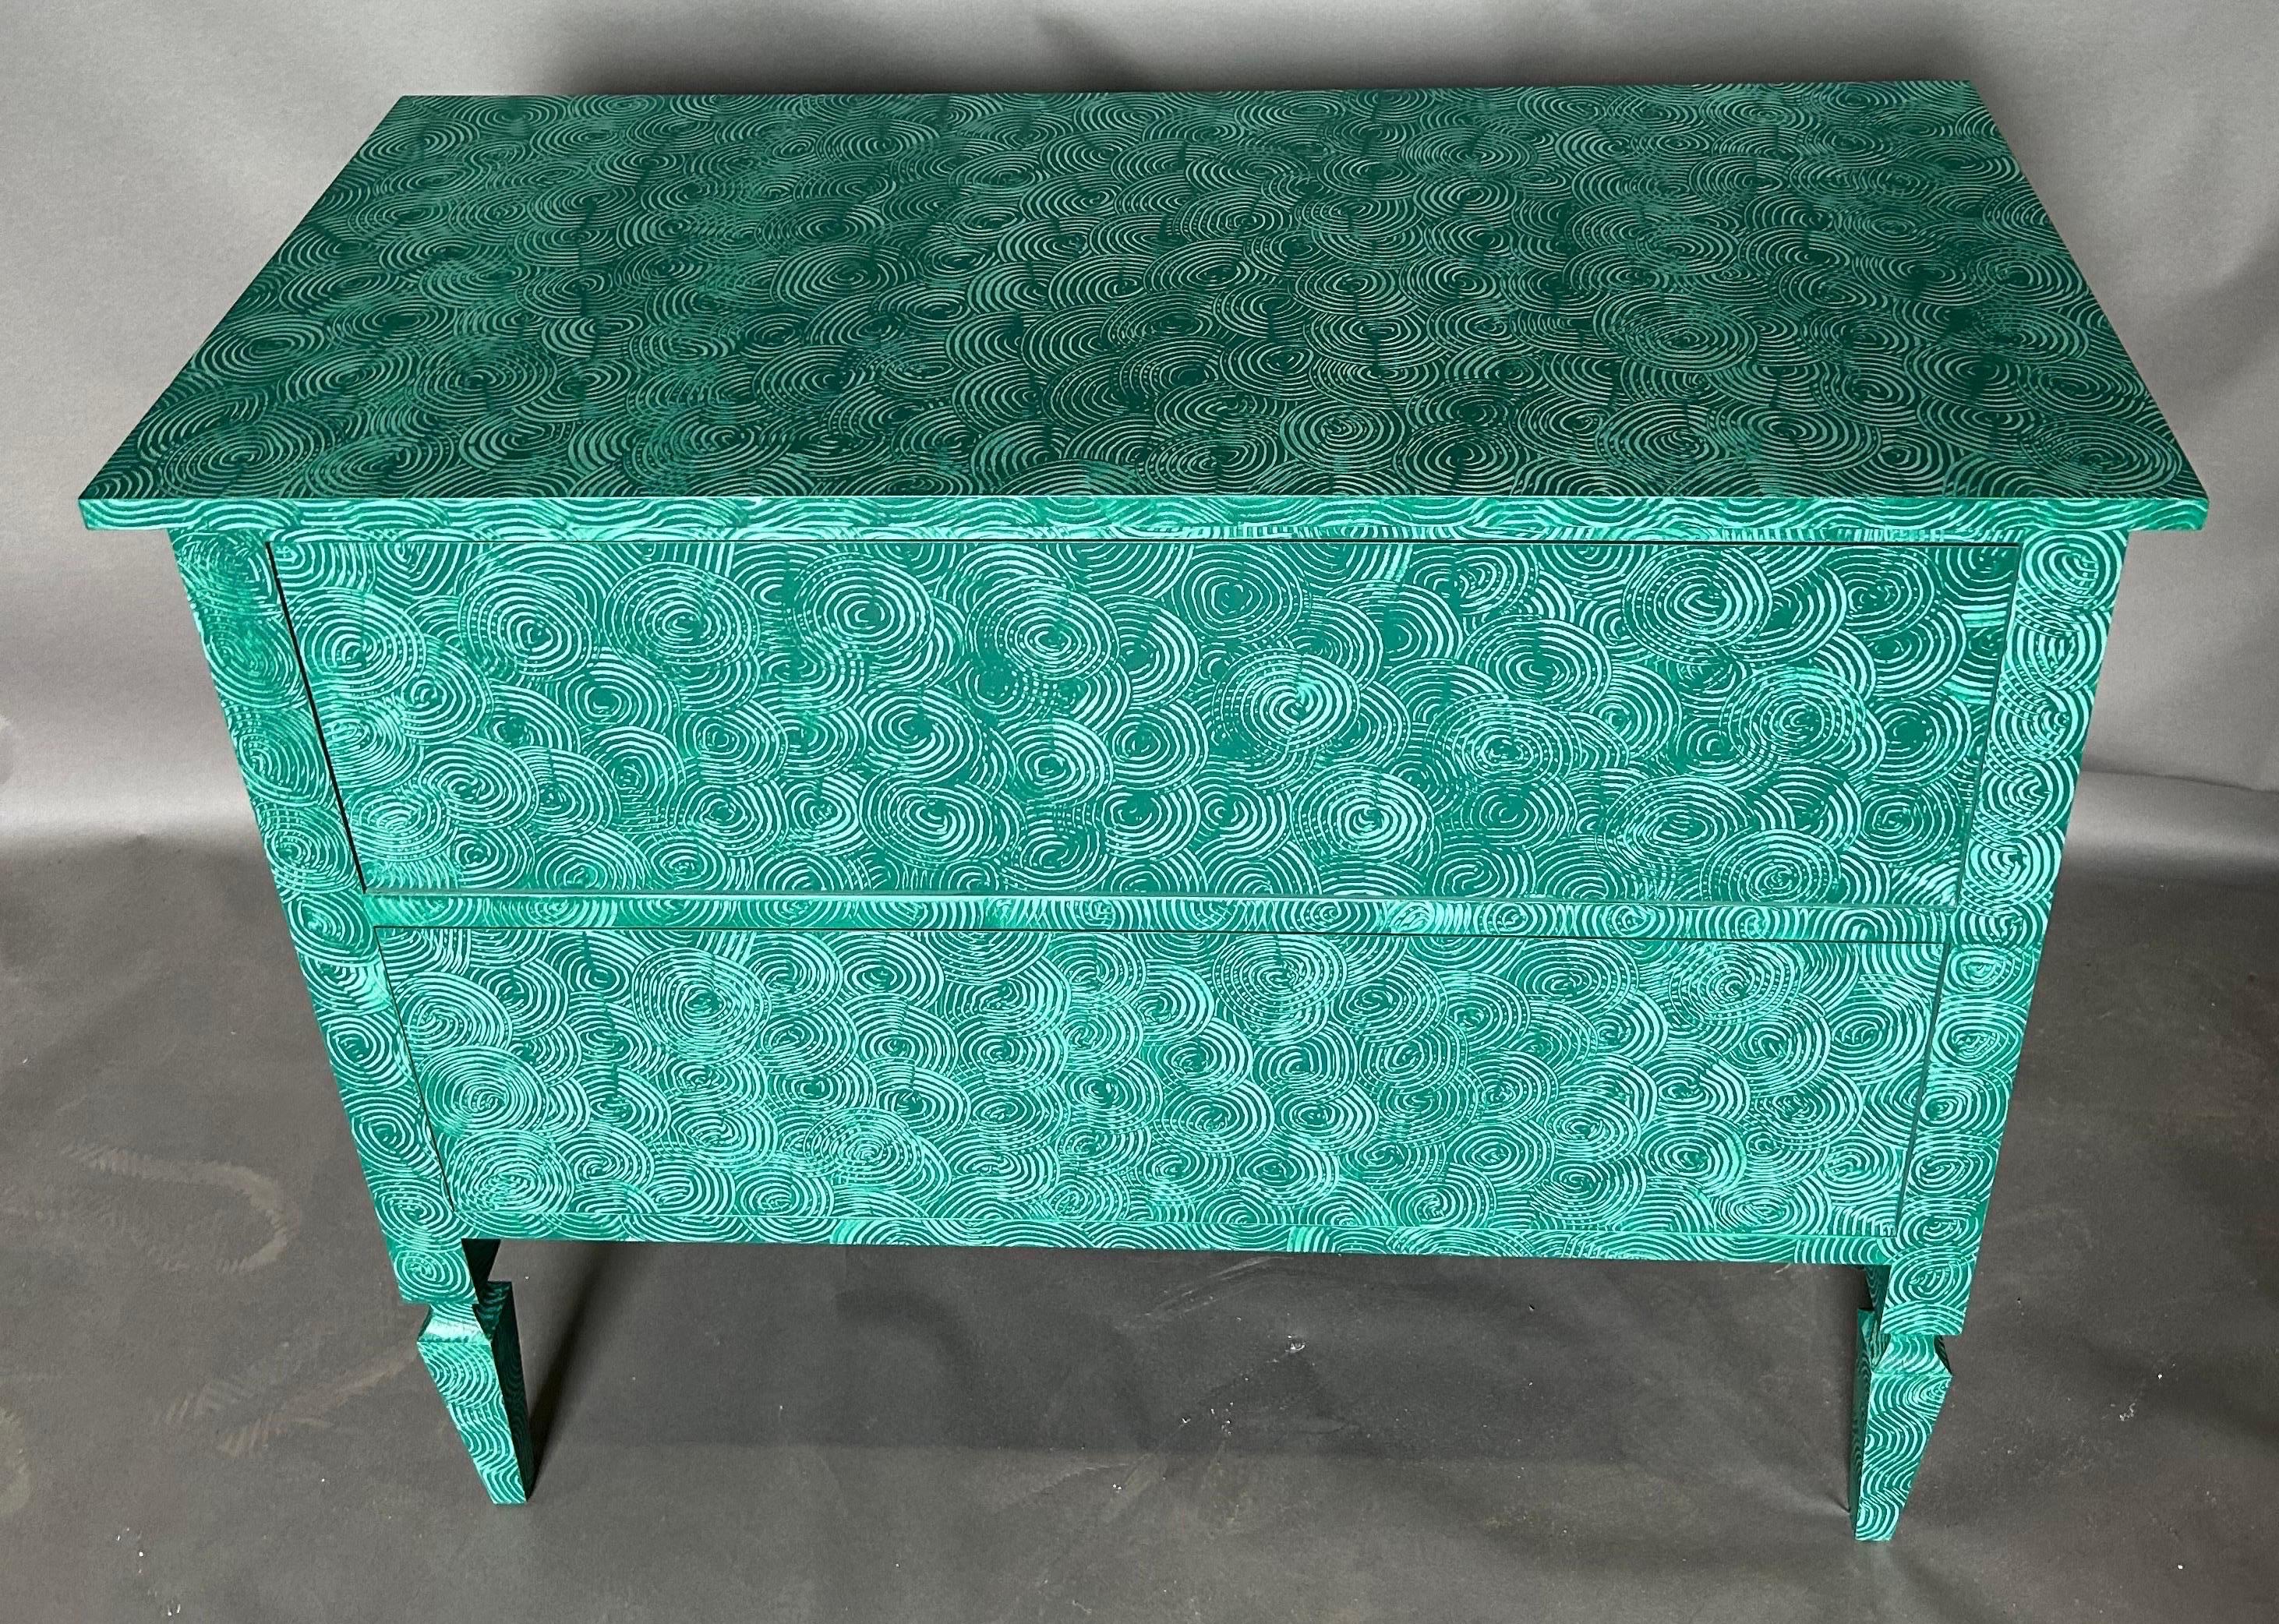 The Delia chest by our sister company, “The Fabulous Things” seen in our hand painted absolute green swirl. Please see website for full list if finishes and color patterns. All items are made to order domestically. Custom dimensions and paint